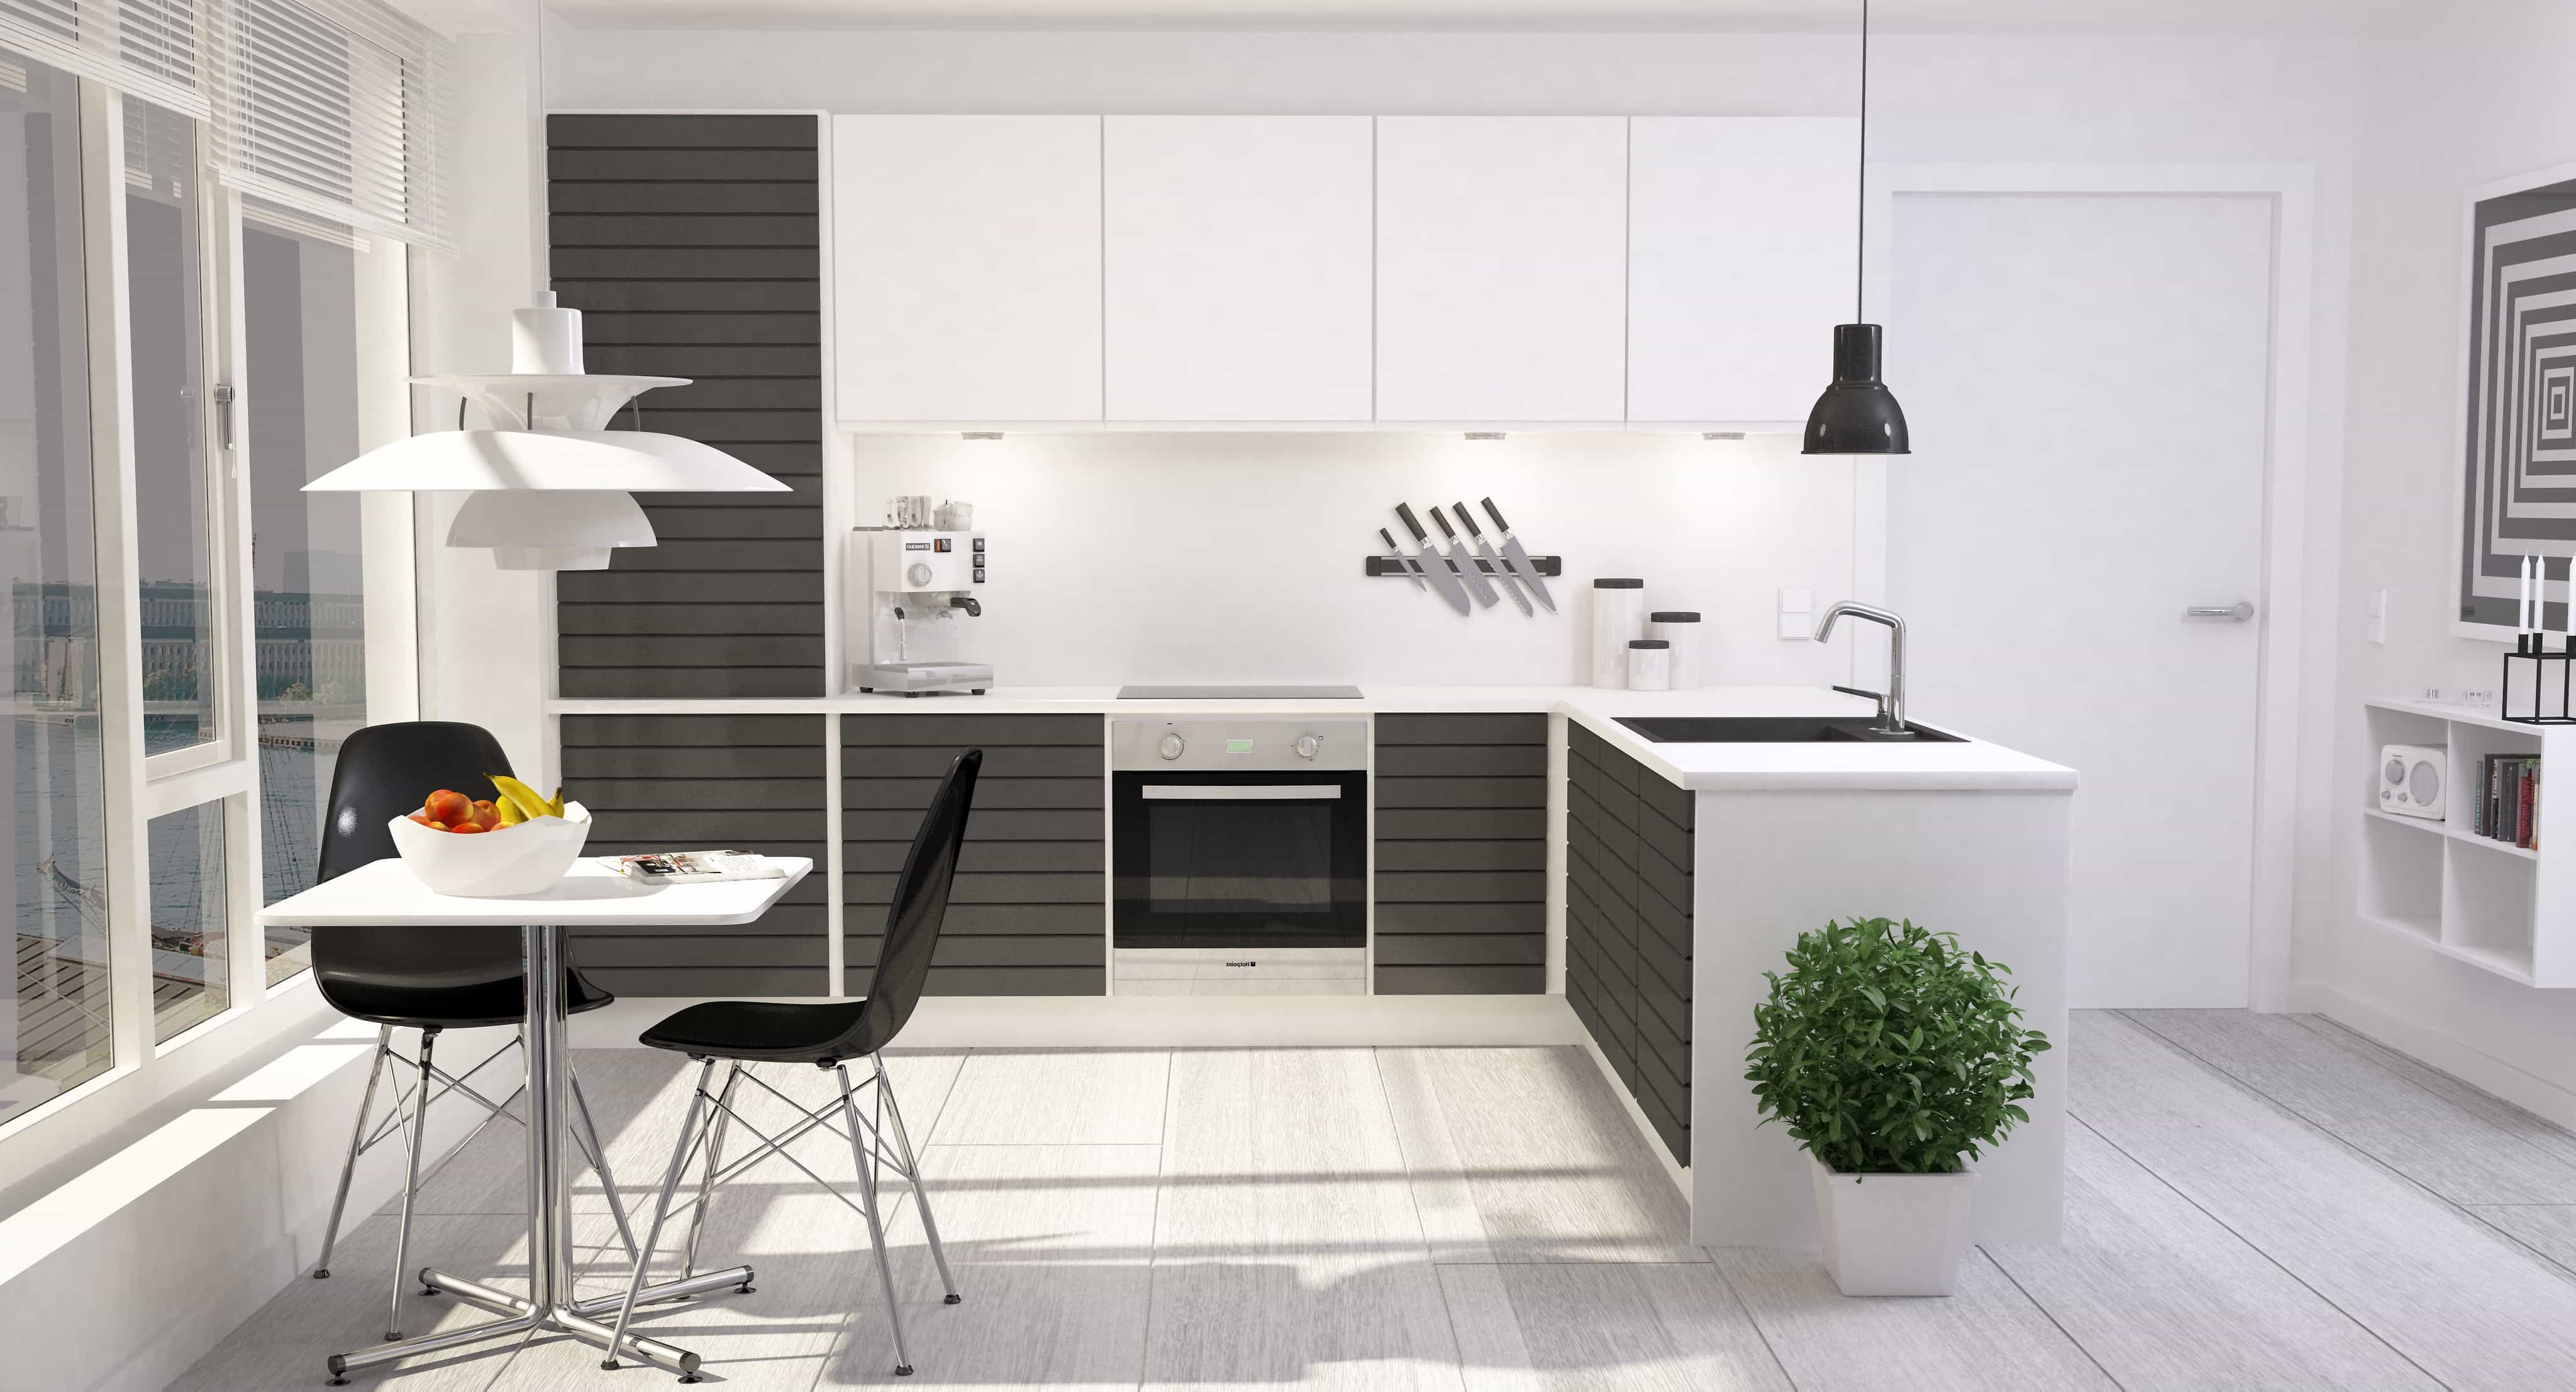 Black And White Contemporary Apartment Kitchen Interior With Flat Panel Cabinets And Small Dining Table And Chairs (View 1 of 15)